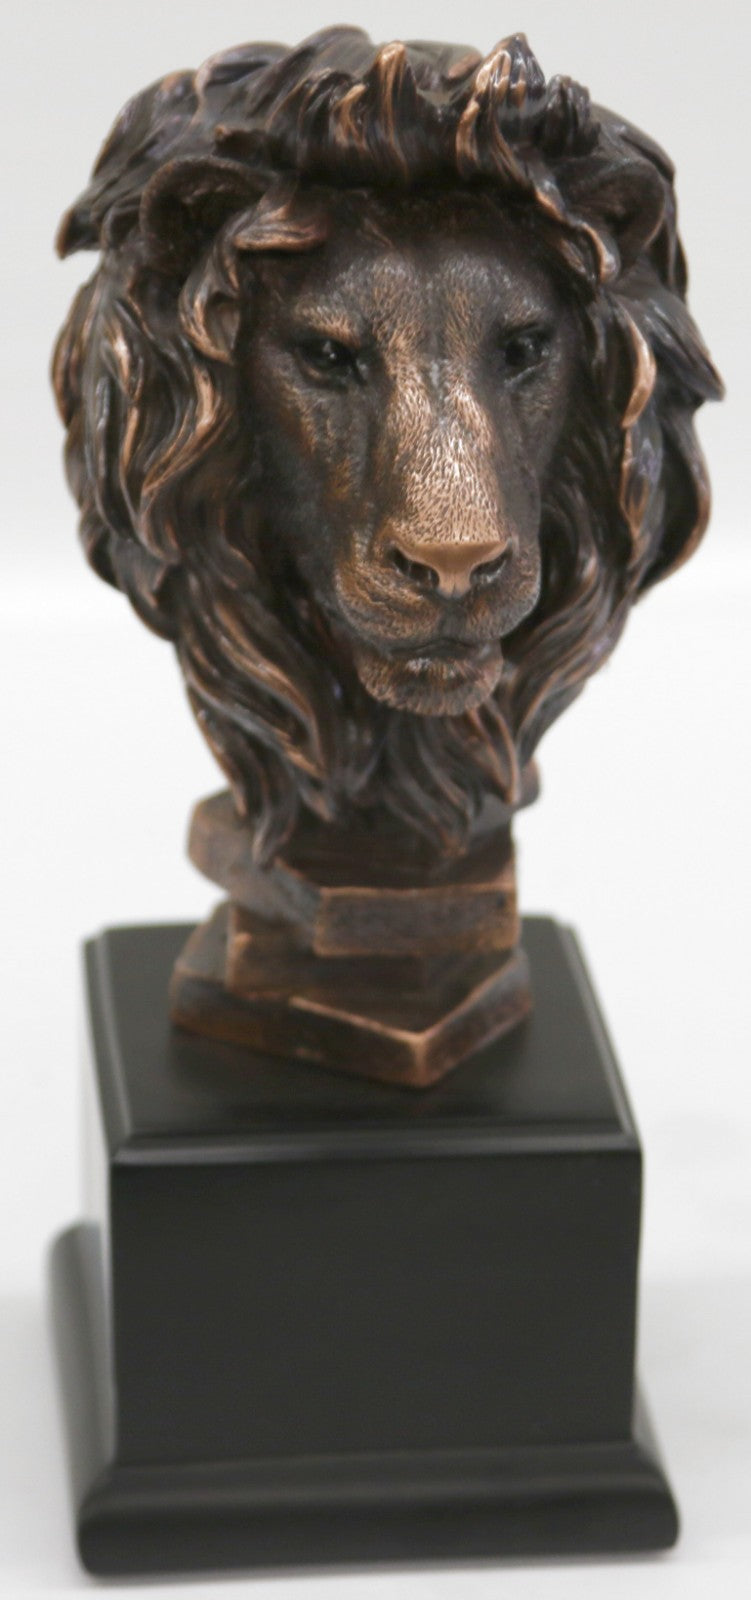 NEW Handcrafted Large LION Head Bust Plinth Mounted Animal Sculpture Art Statue